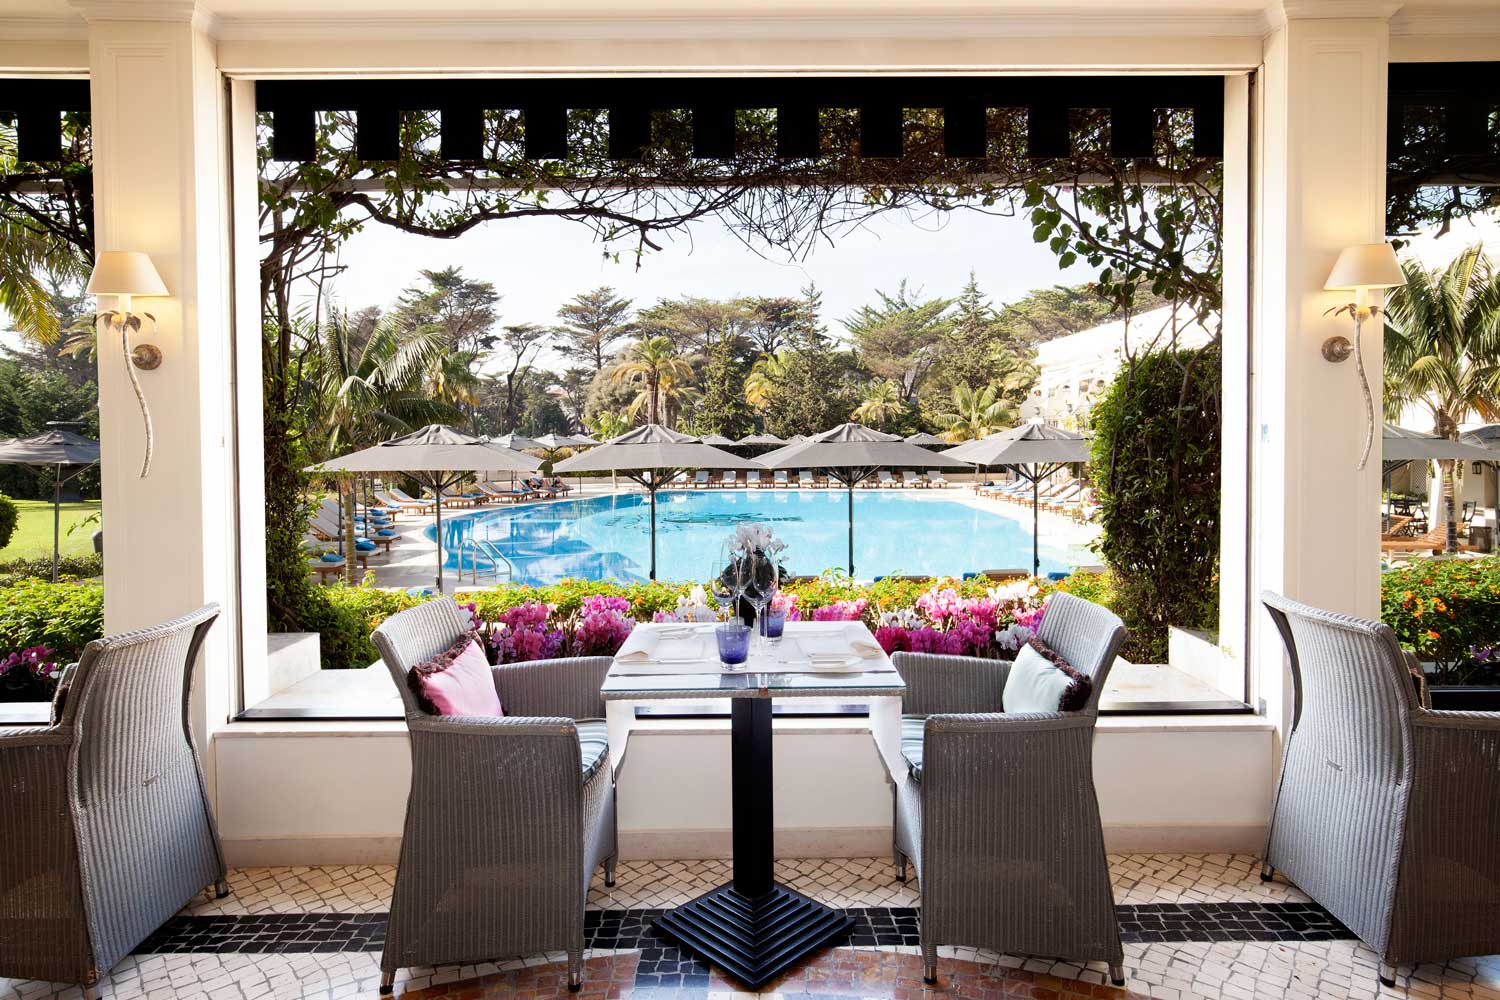 Golf-expedition-golfreizen-golfresort-Palacio-Estoril-Hotel-Golf-And-Spa-romantic-dinner-table-with-pool-view